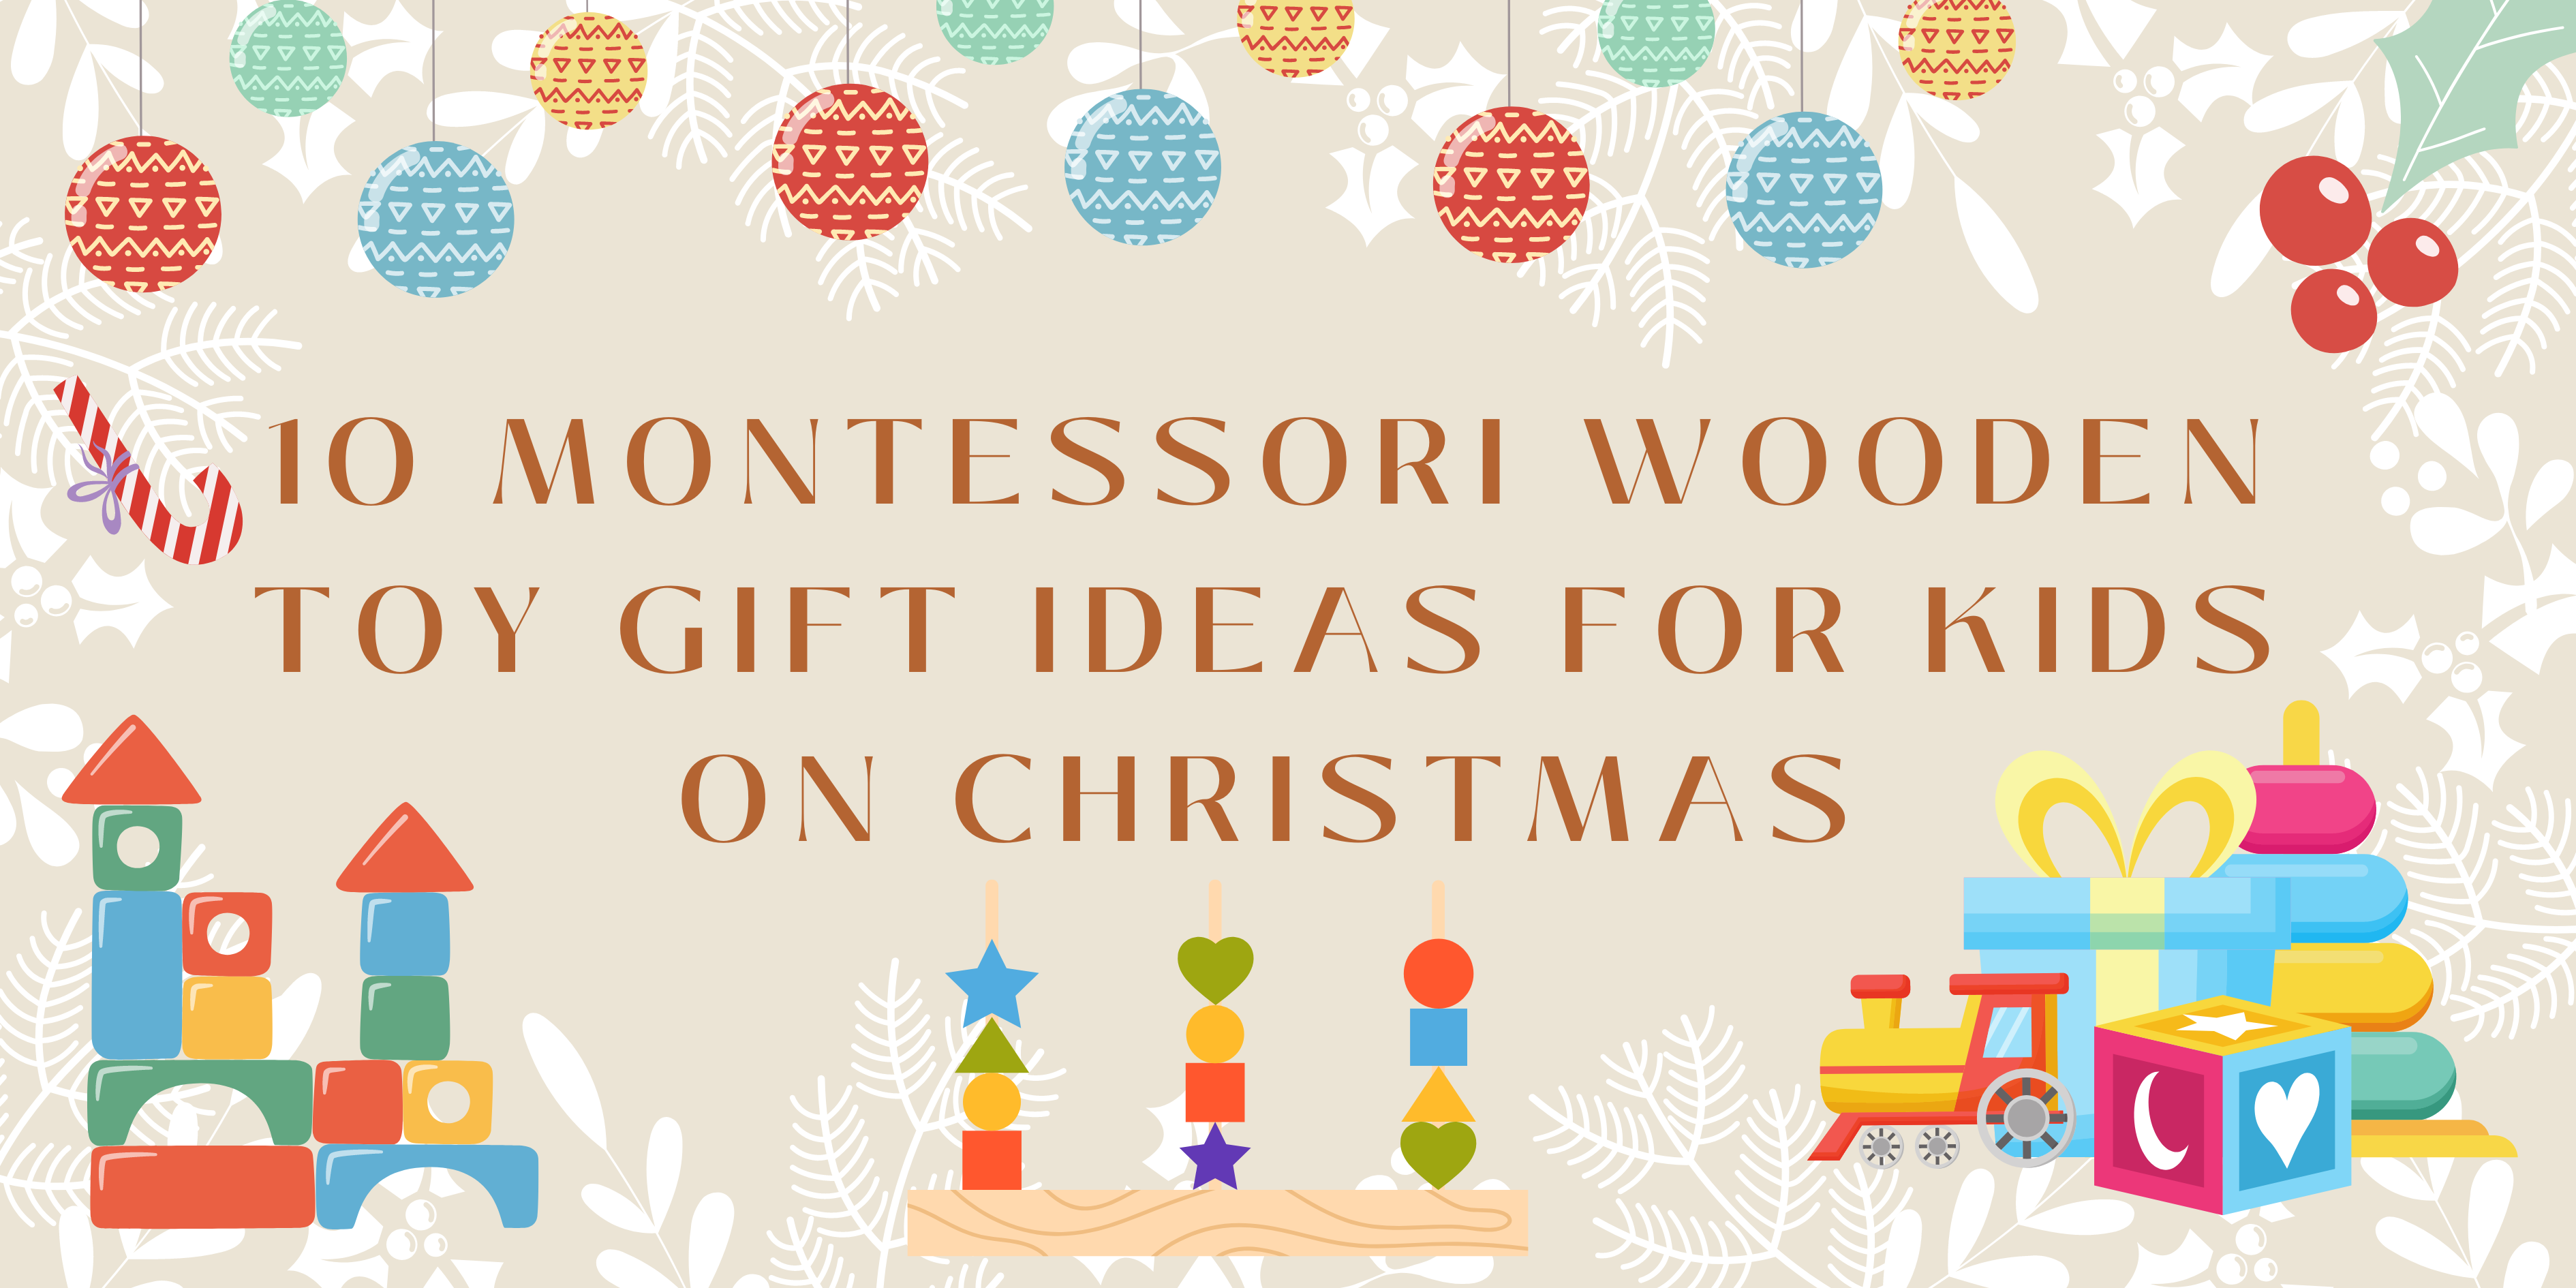 Unwrapping Wonder: 10 Unique Montessori Wooden Toy Gift Ideas for Kids on Christmas